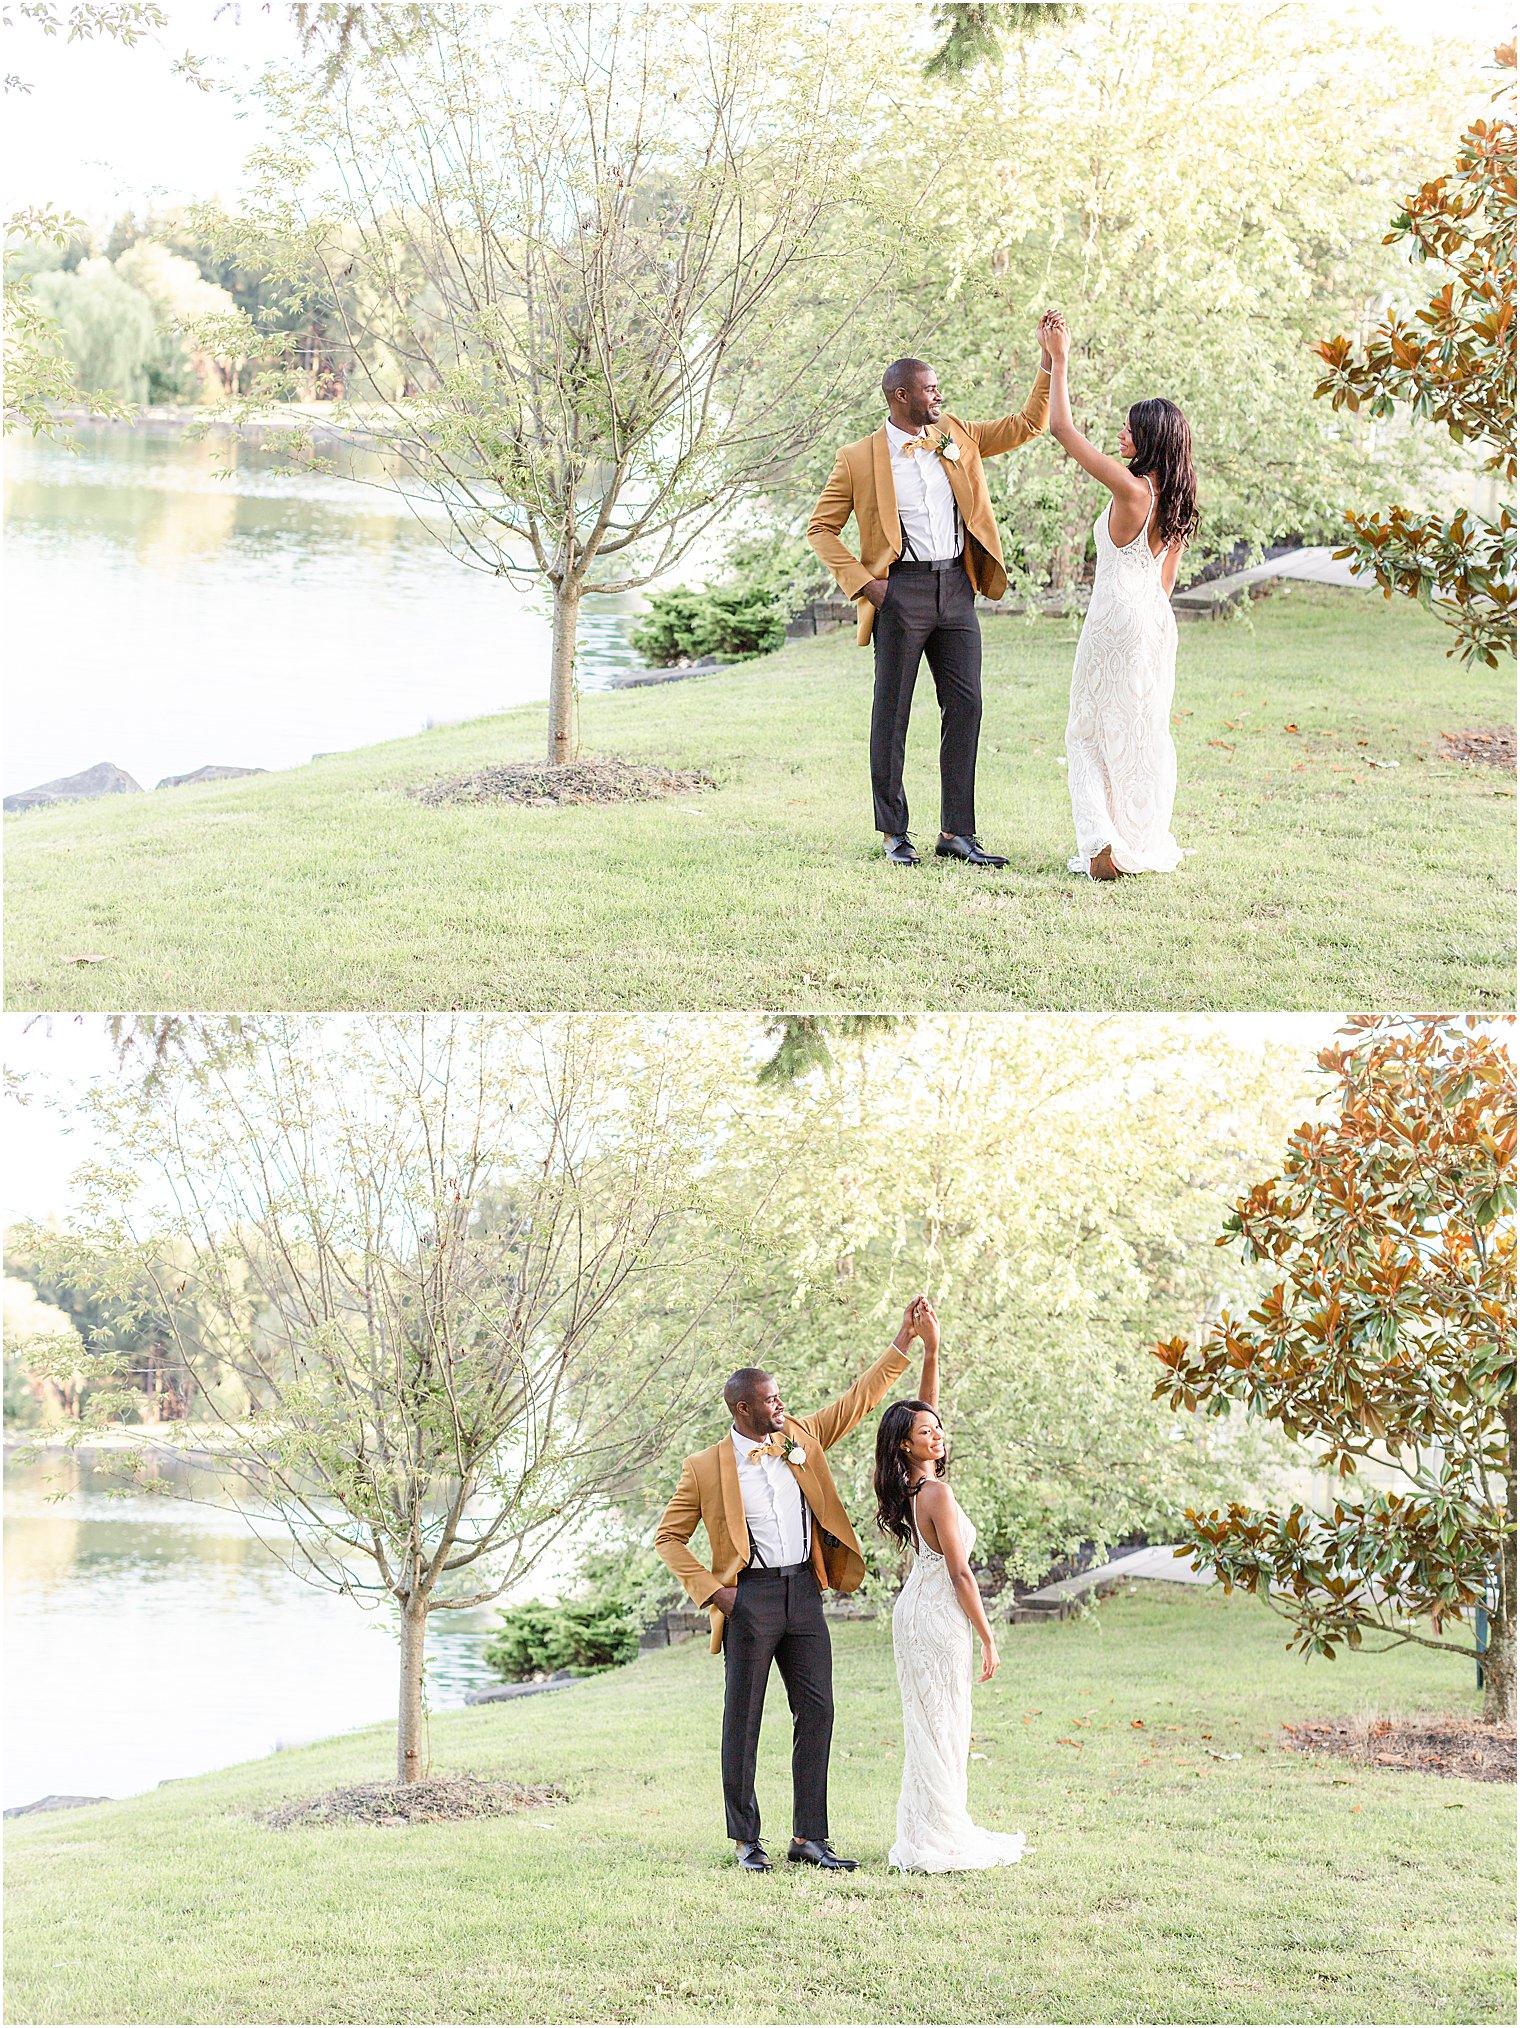 bride and groom dance lakeside during wedding editorial shoot